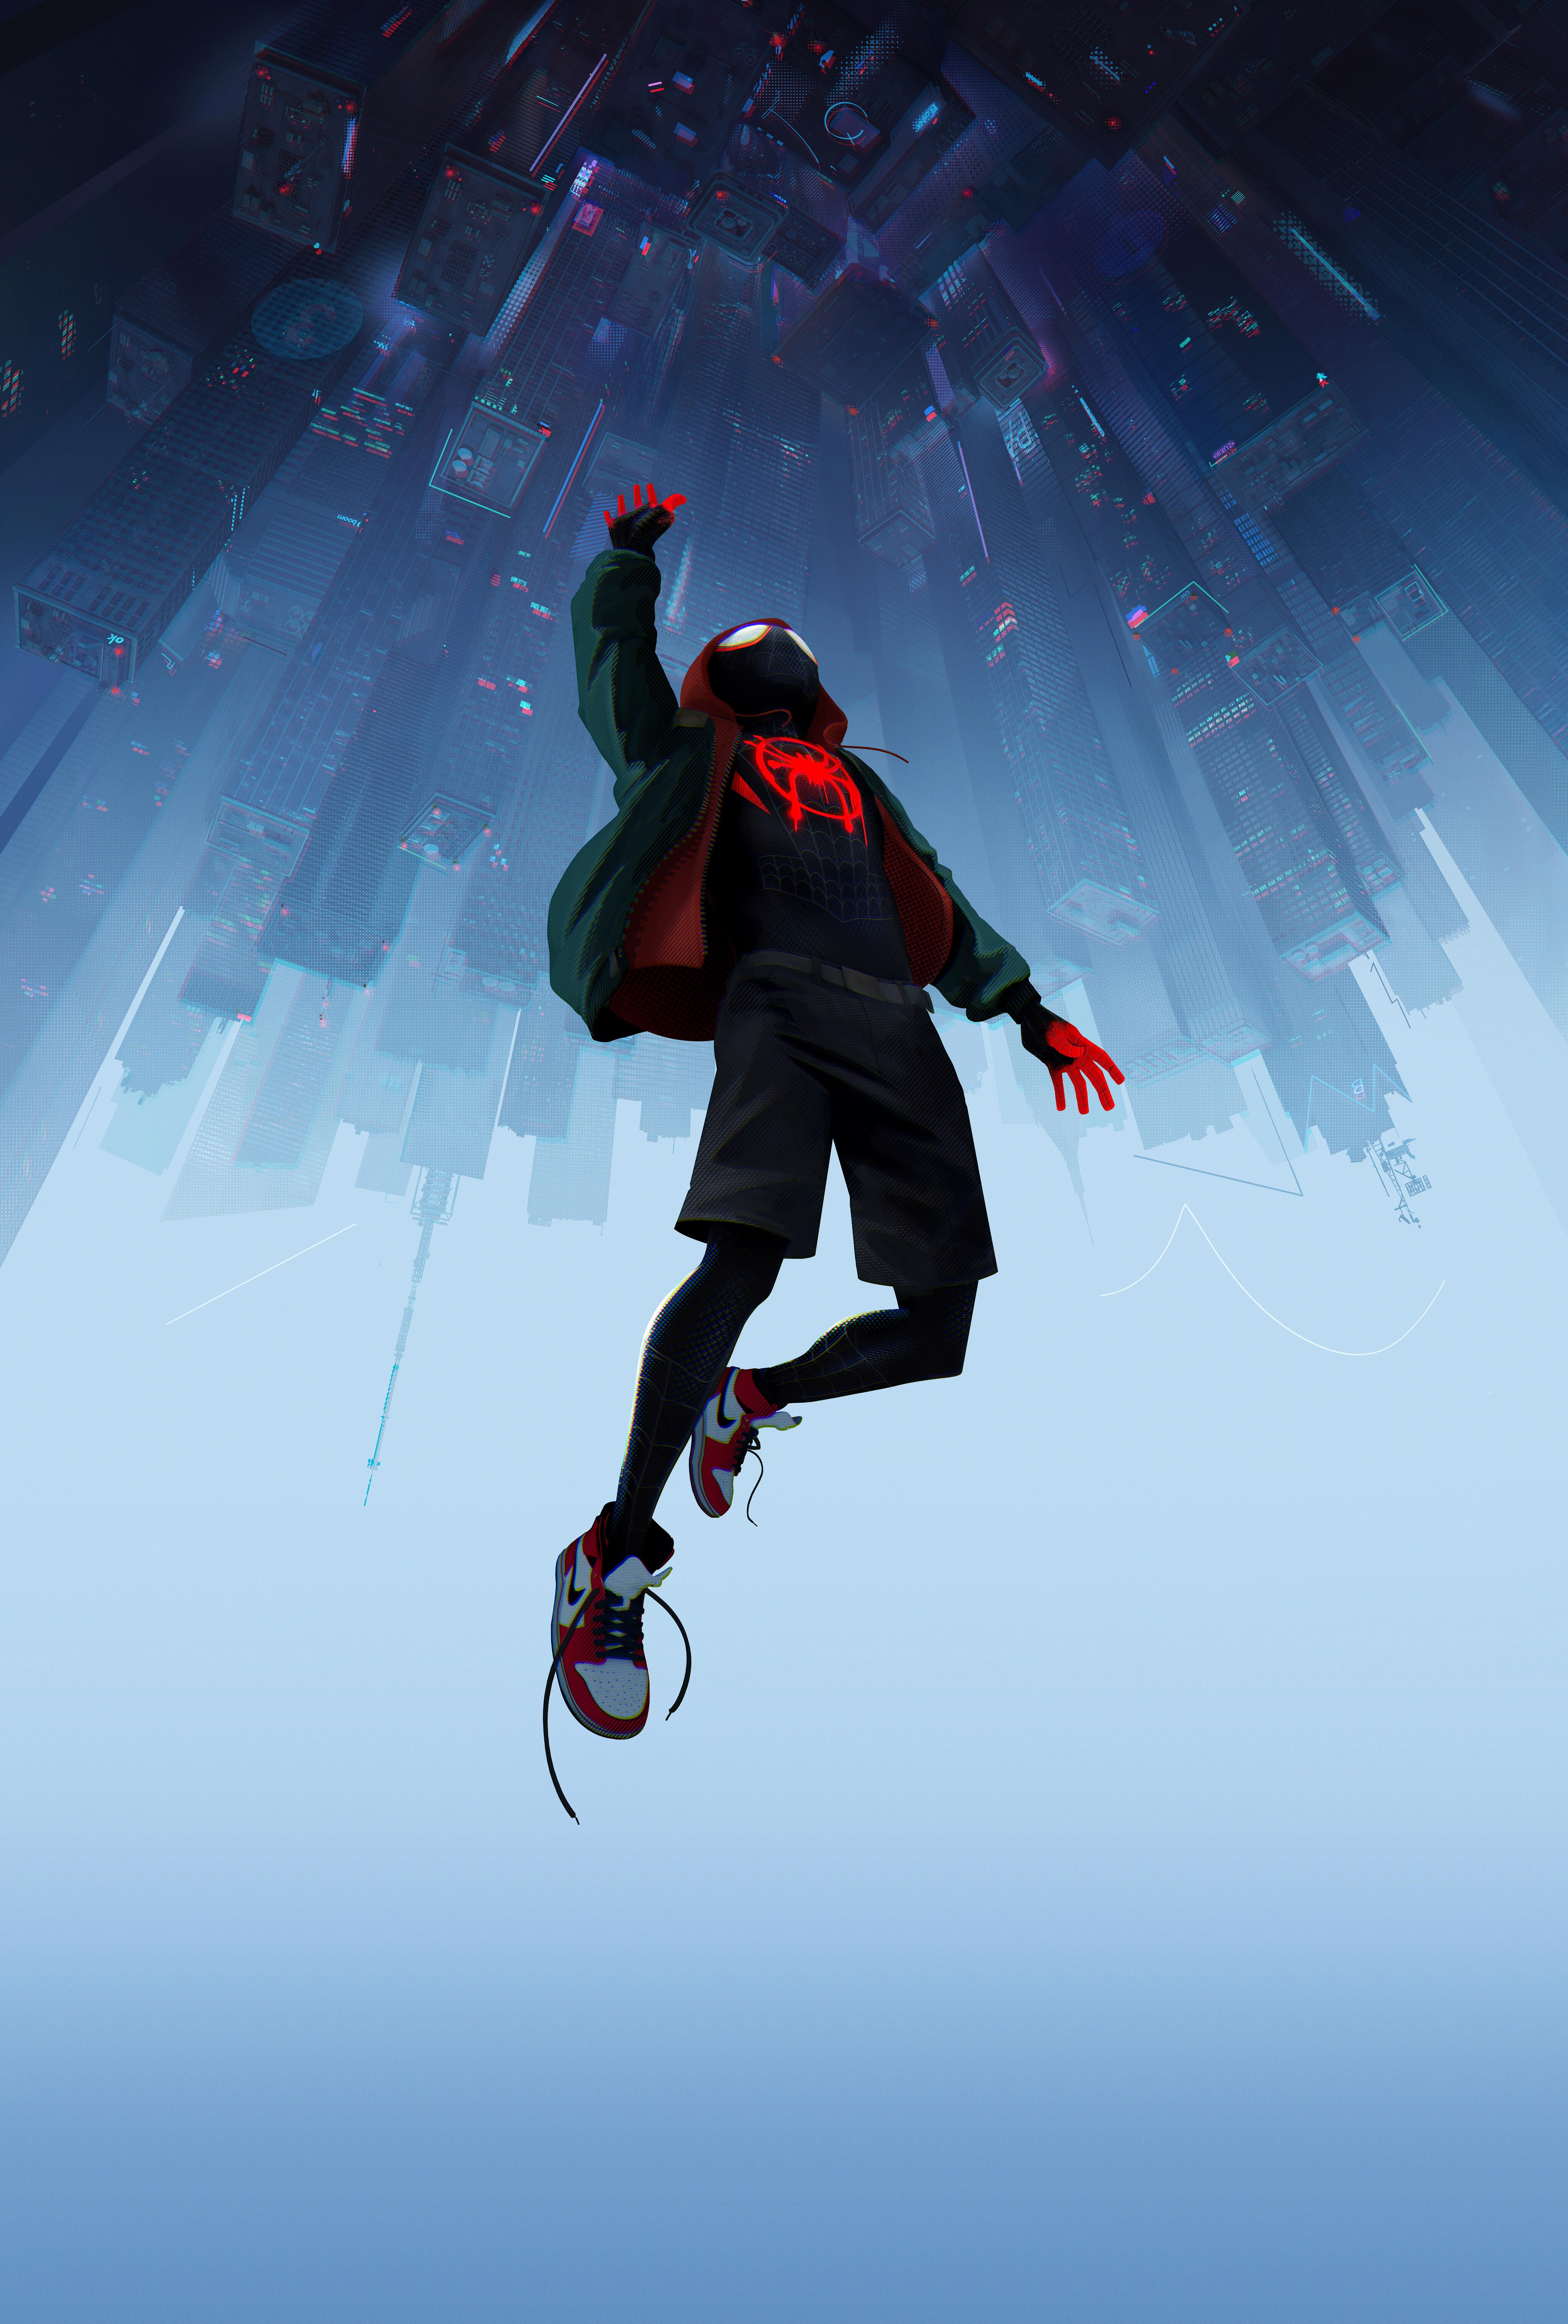 24+] Spider Man Into The Spider Verse Wallpapers - WallpaperSafari